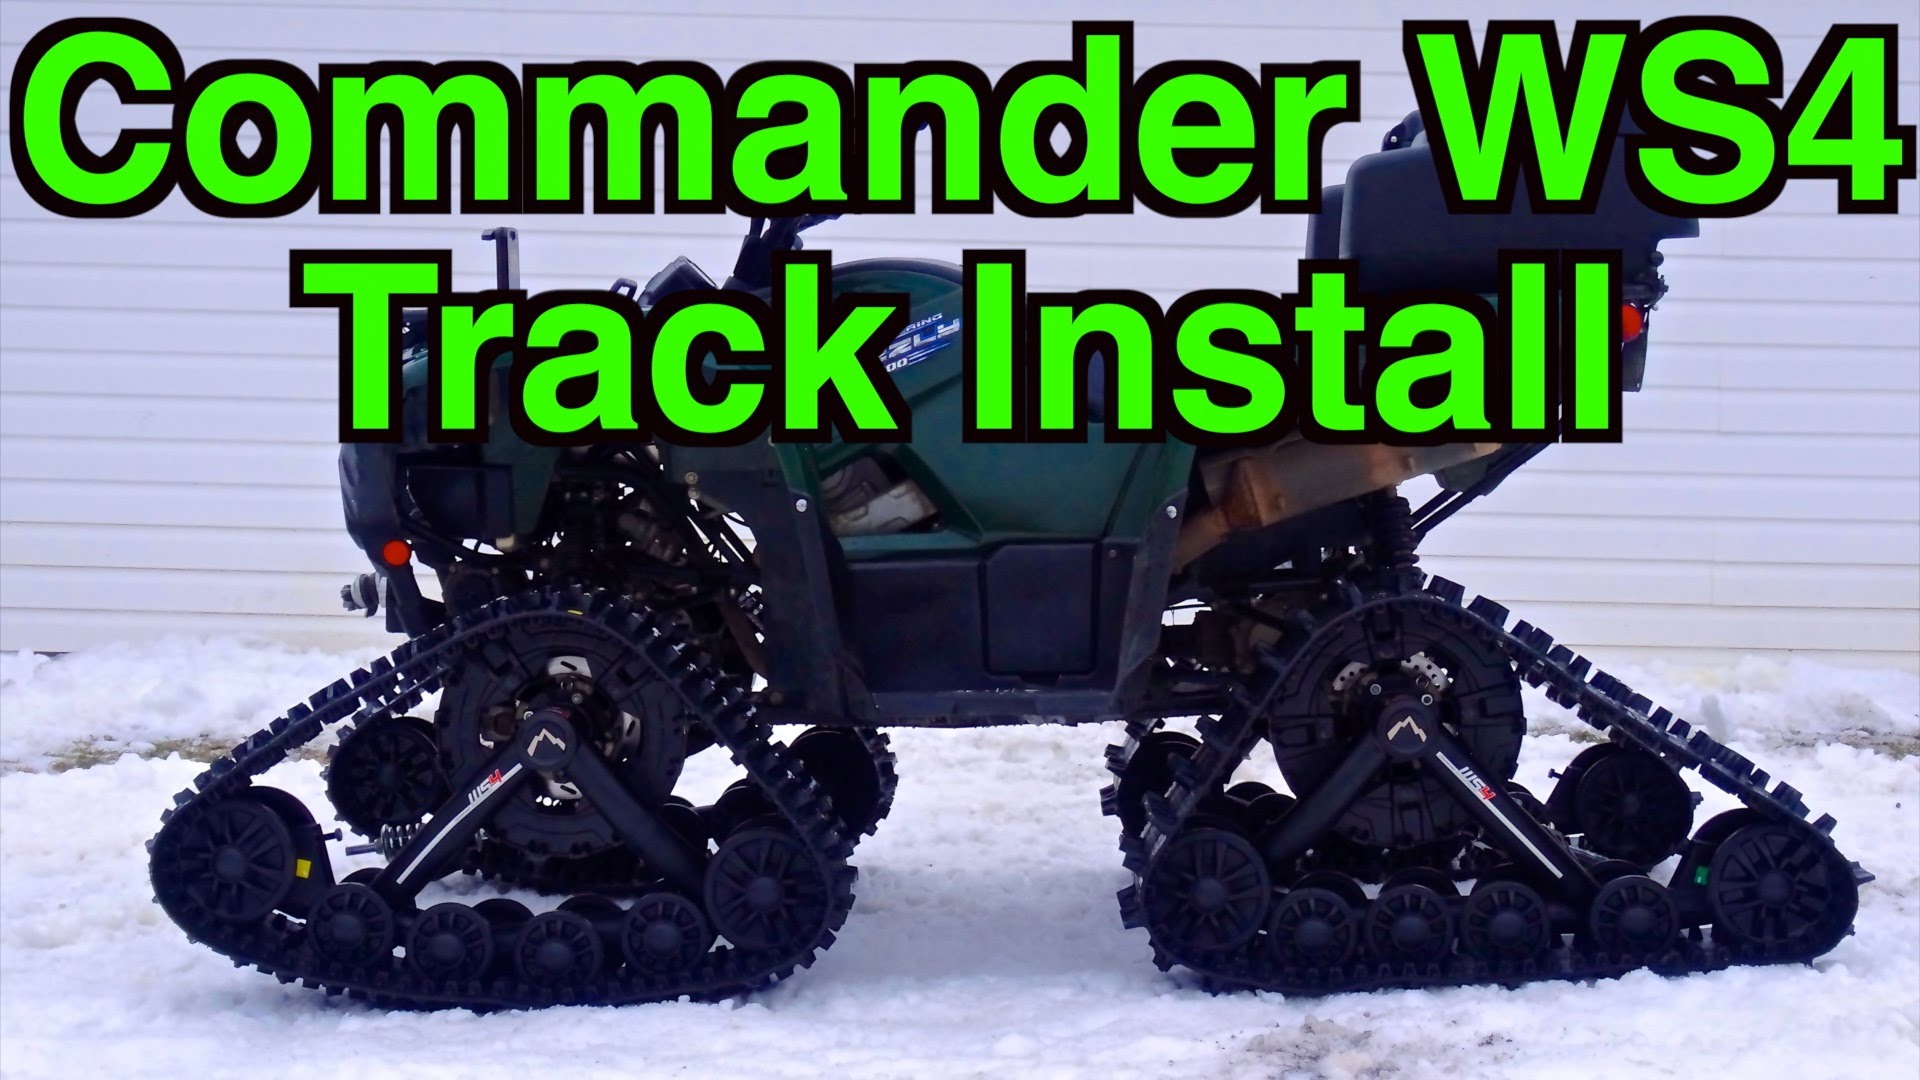 Kimpex Commander WS4 Track Install On Yamaha Grizzly 700 - Dec. 2014 ...